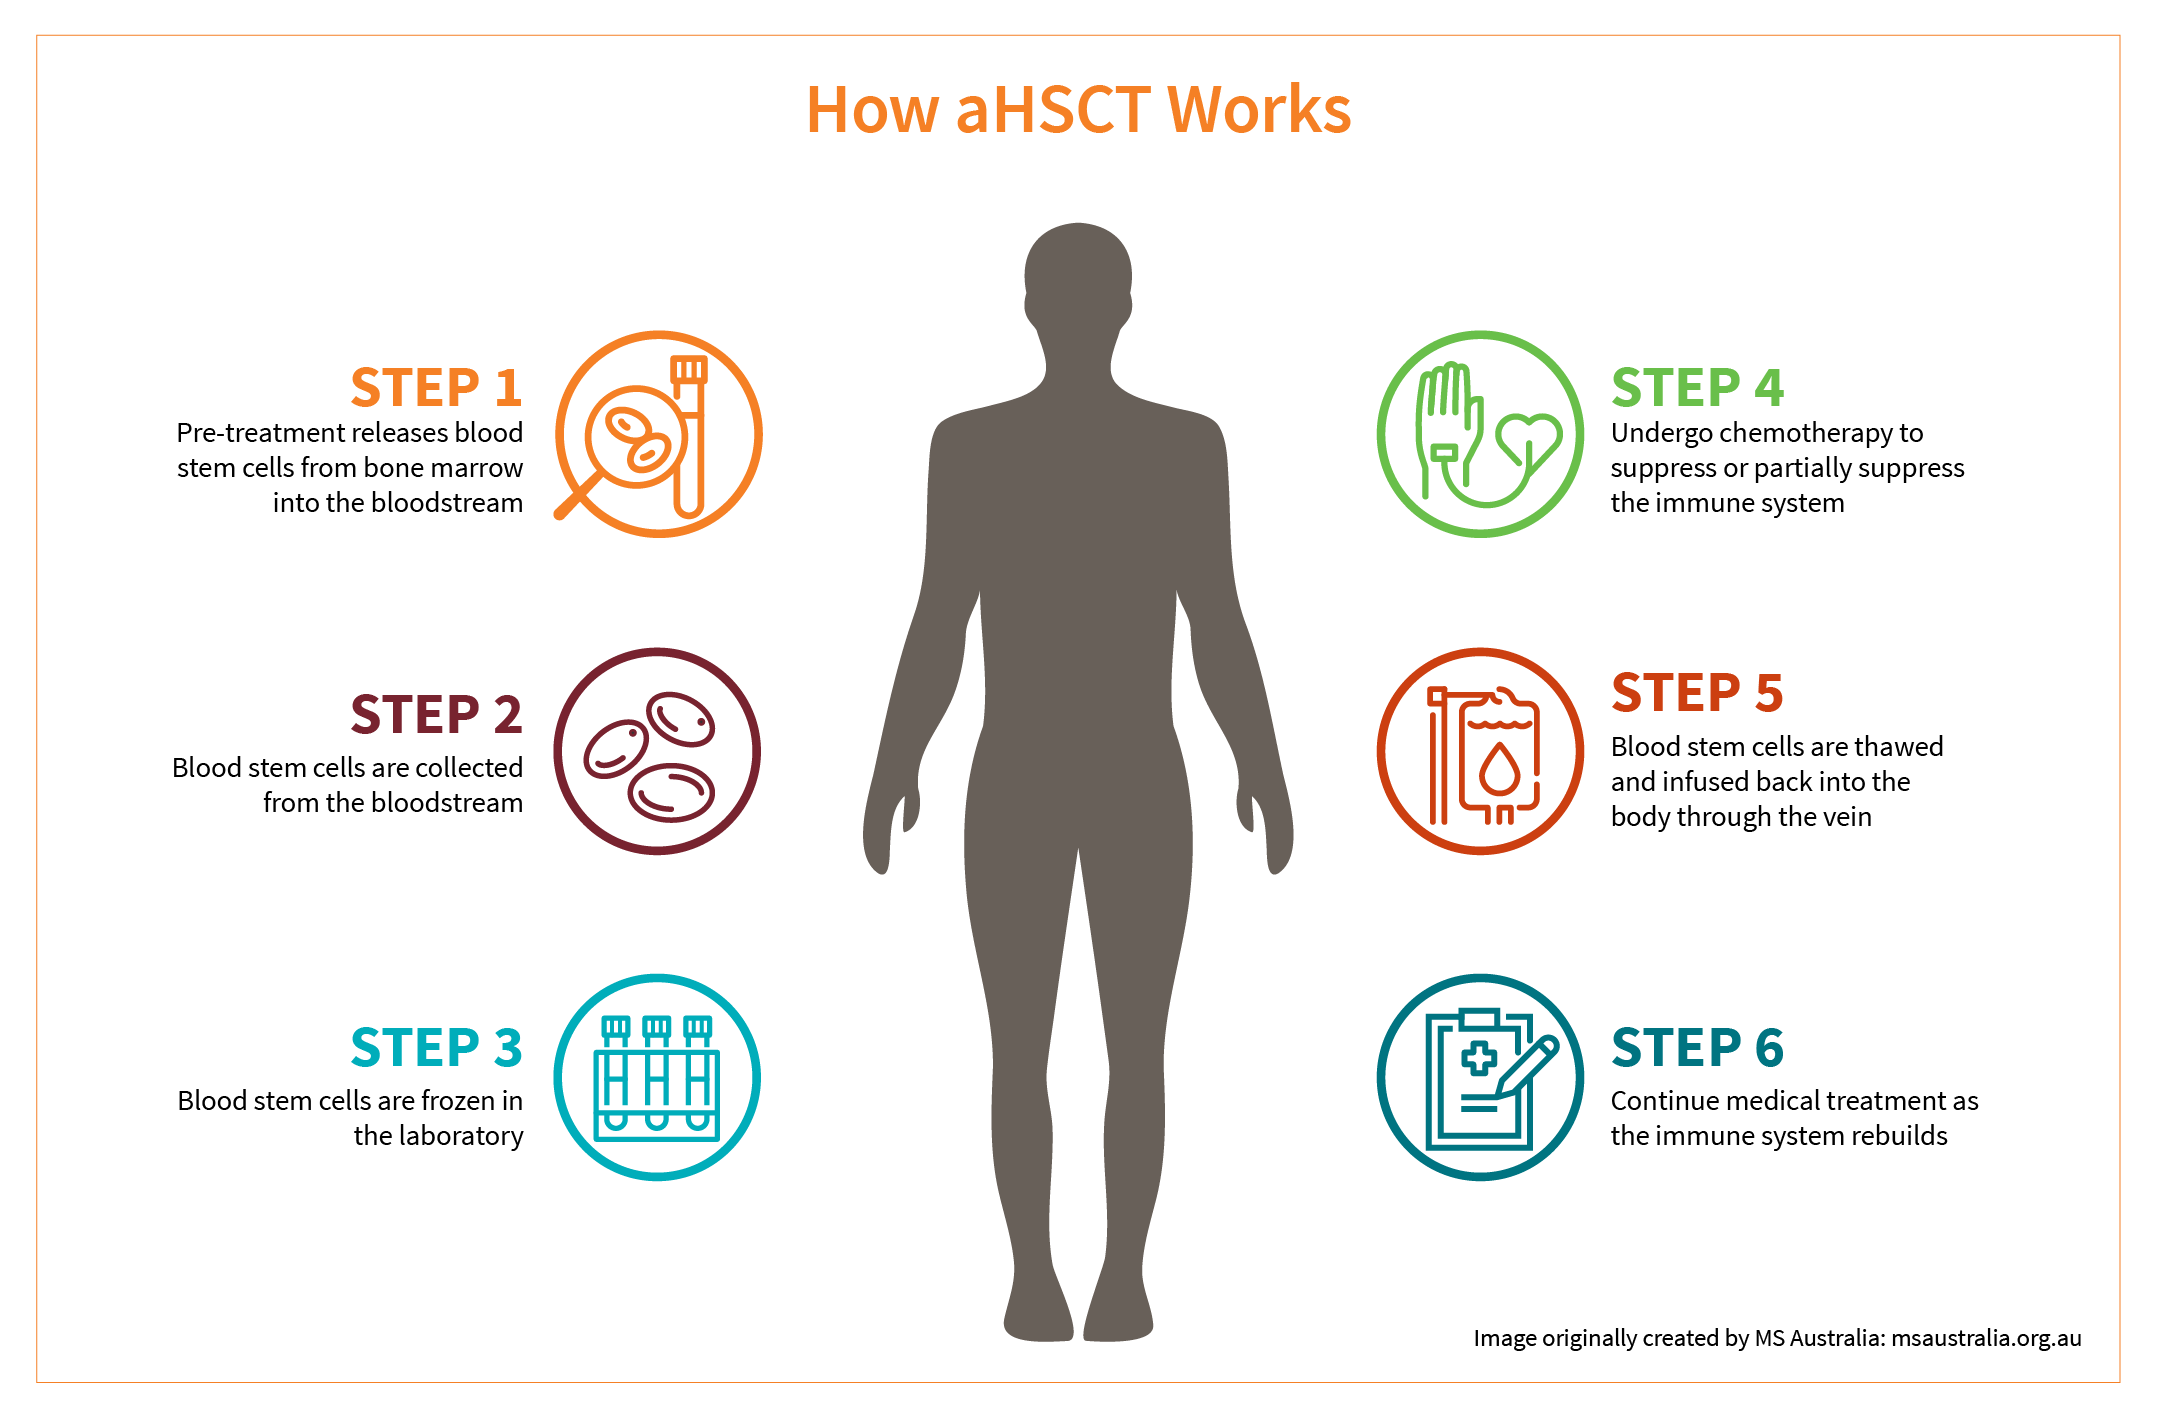 How aHSCT Works in Six Steps 1: Pre-treatment releases blood stem cells from the bone marrow into the bloodstream 2: Blood stem cells are collected from the bloodstream 3: Blood stem cells are frozen in the laboratory 4: Undergo chemotherapy to remove or partially remove the immune system 5: Blood stem cells are thawed and infused back into the body through vein 6: Continue medical treatment as the immune system rebuilds